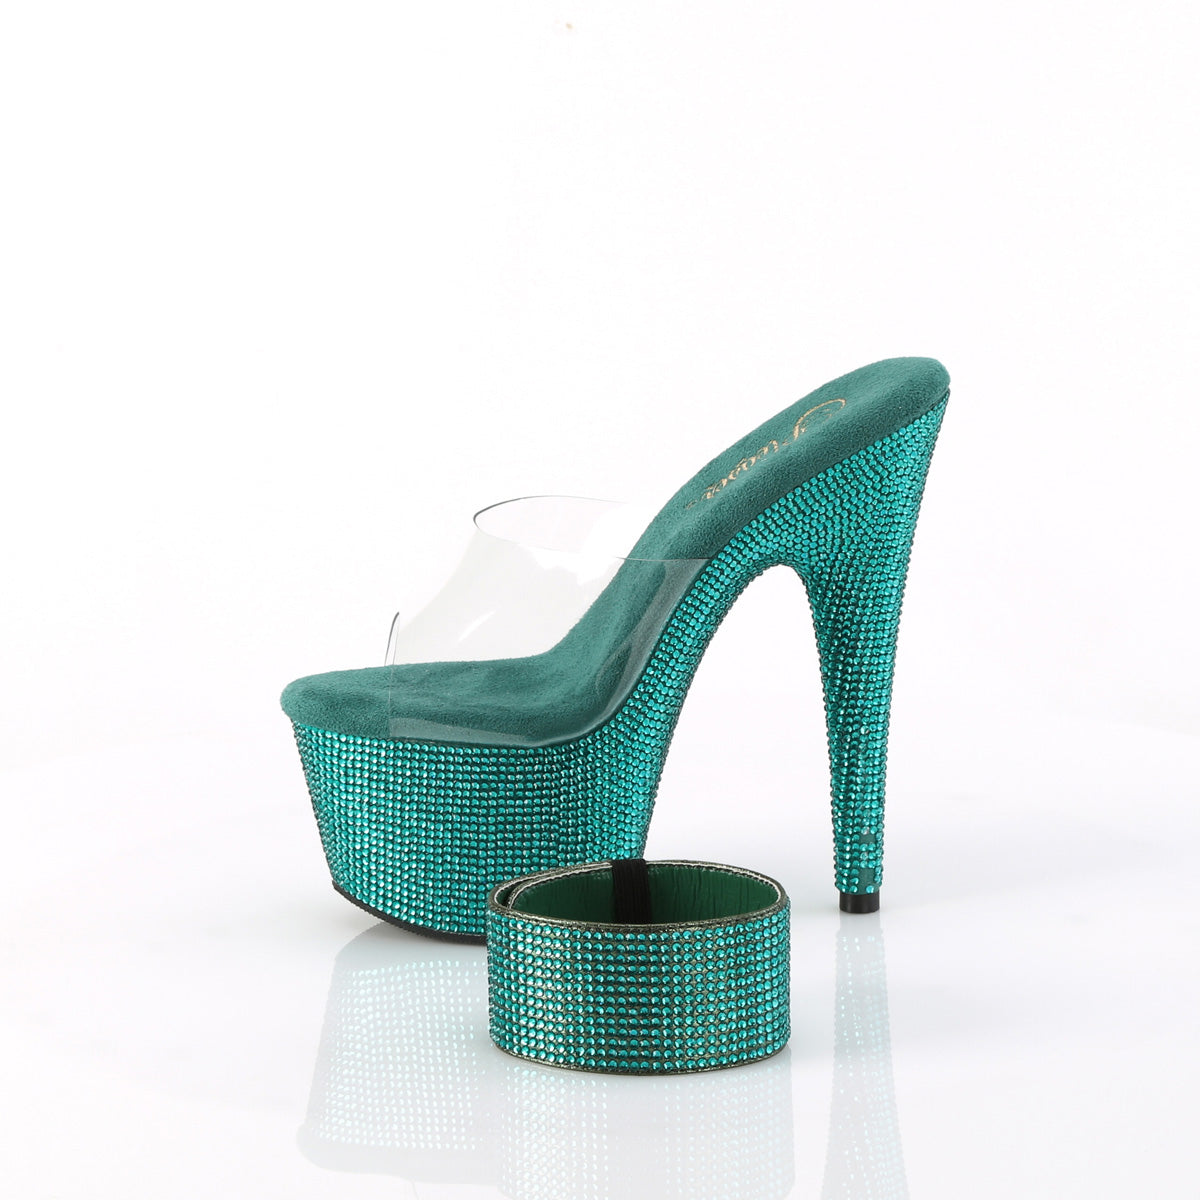 BEJEWELED-712RS Pleaser Emerald Bling Pole Dancing Shoes.